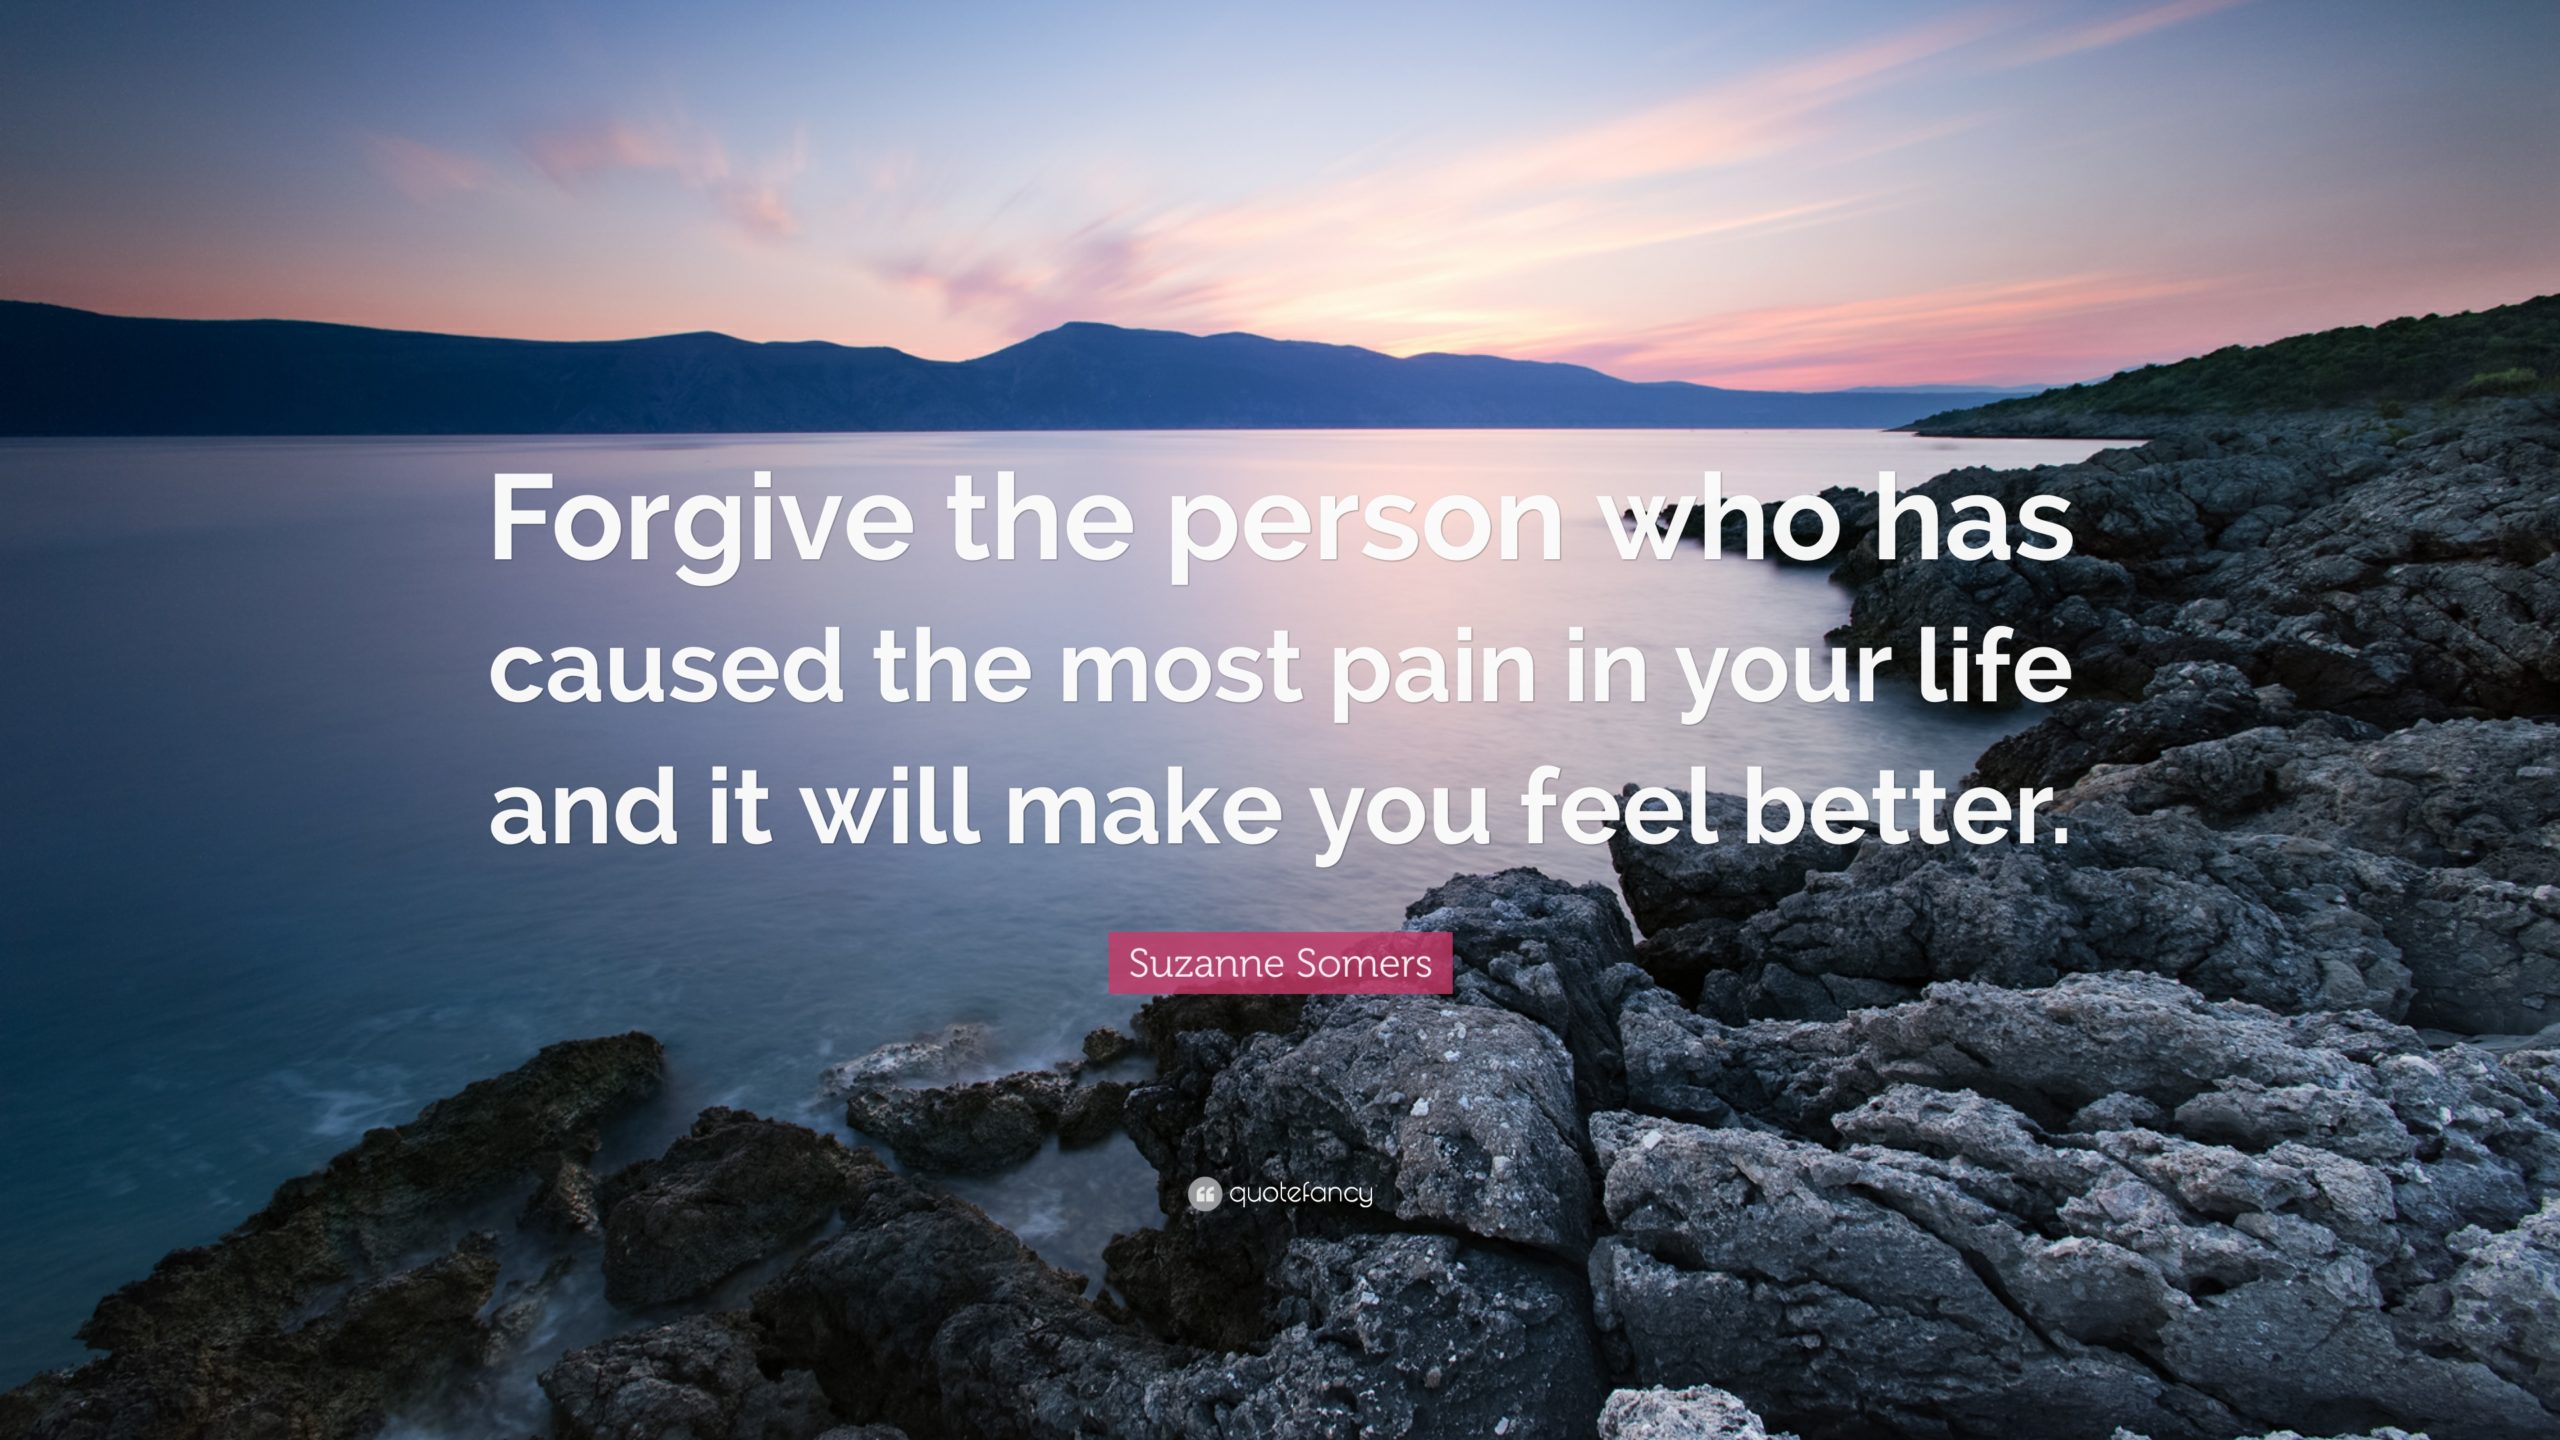 Forgive-the-person-who-has-caused-the-most